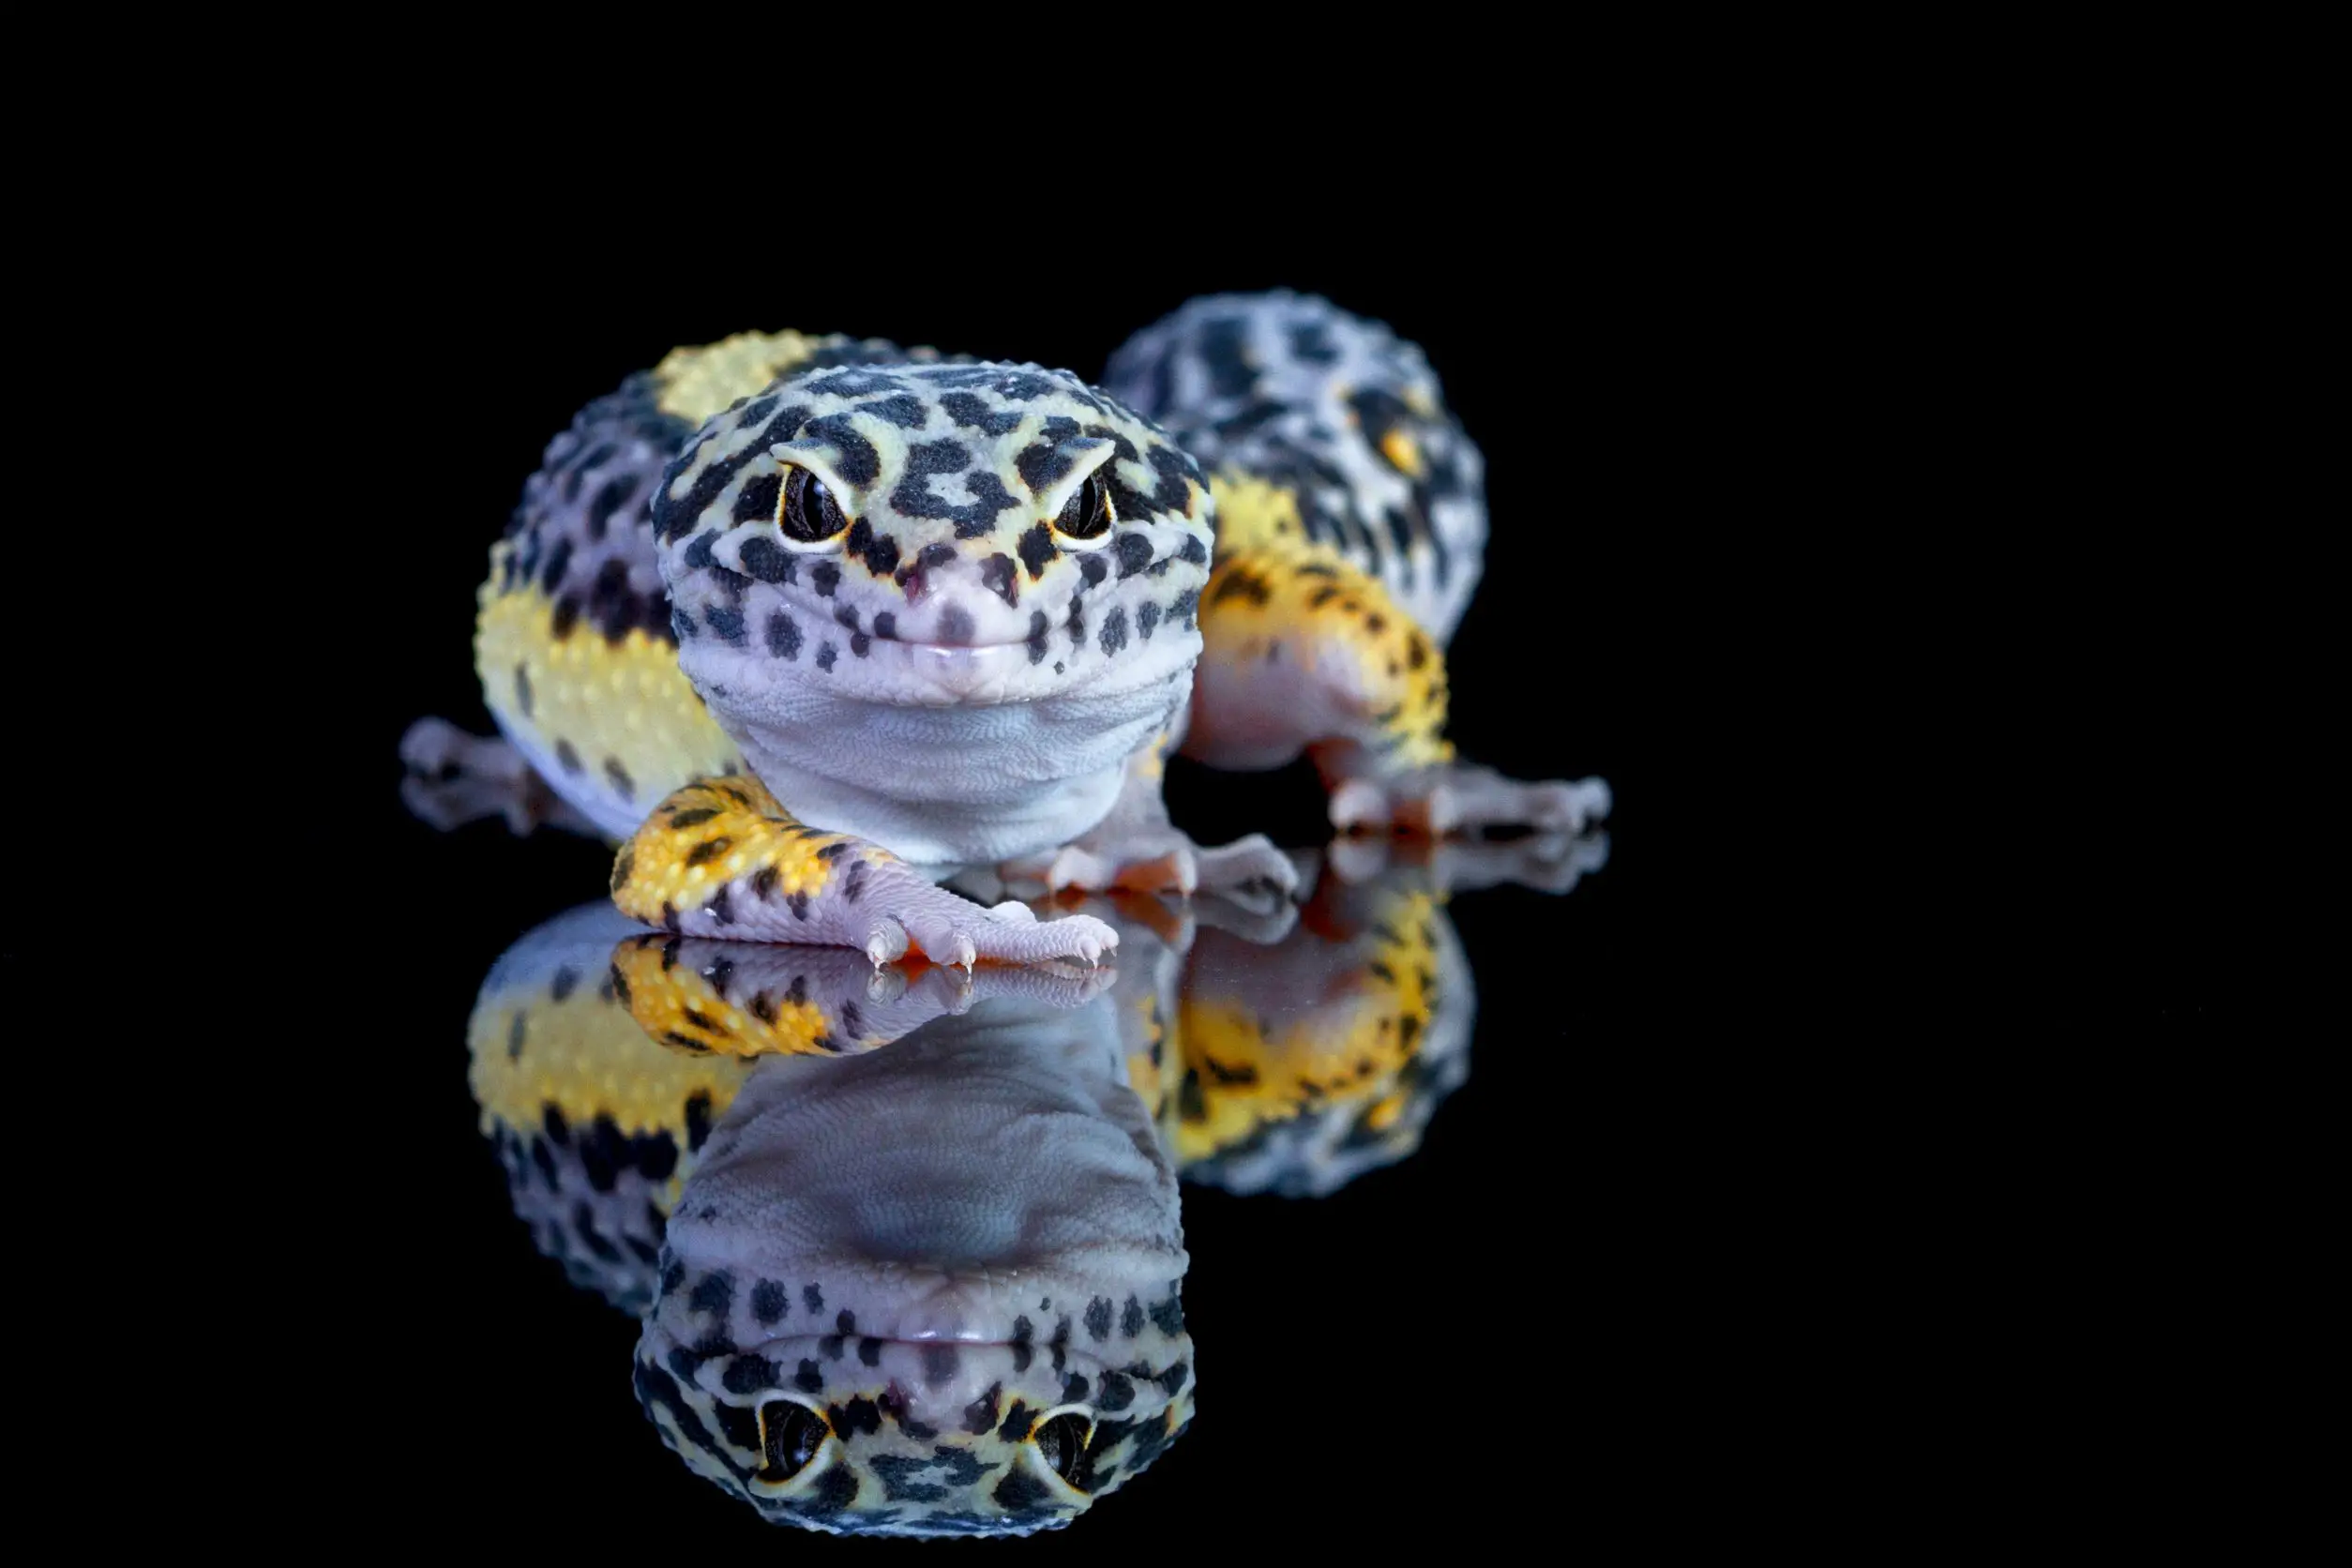 how often should i give my leopard gecko calcium?